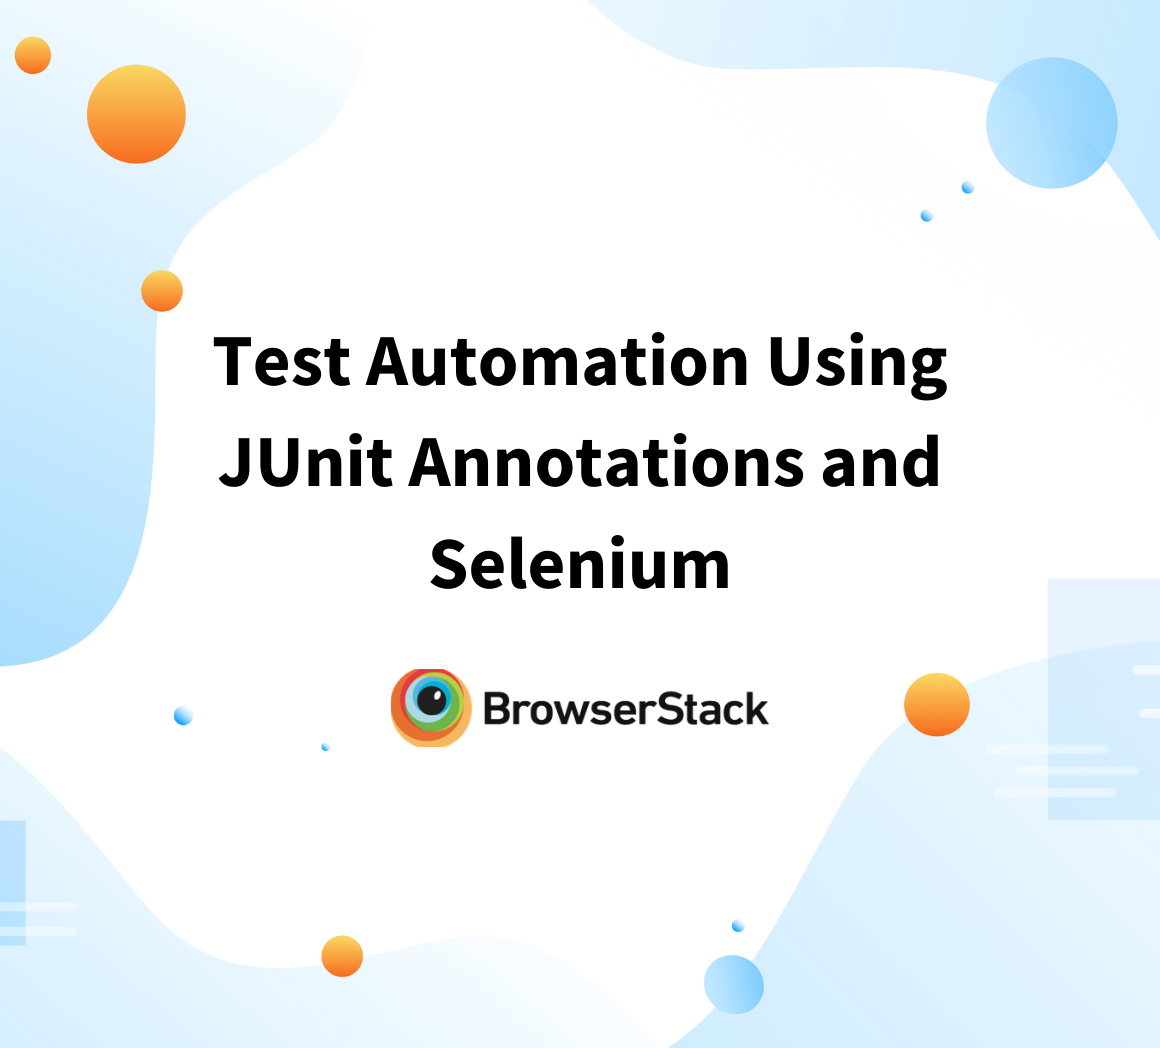 How to use Selenium and JUnit